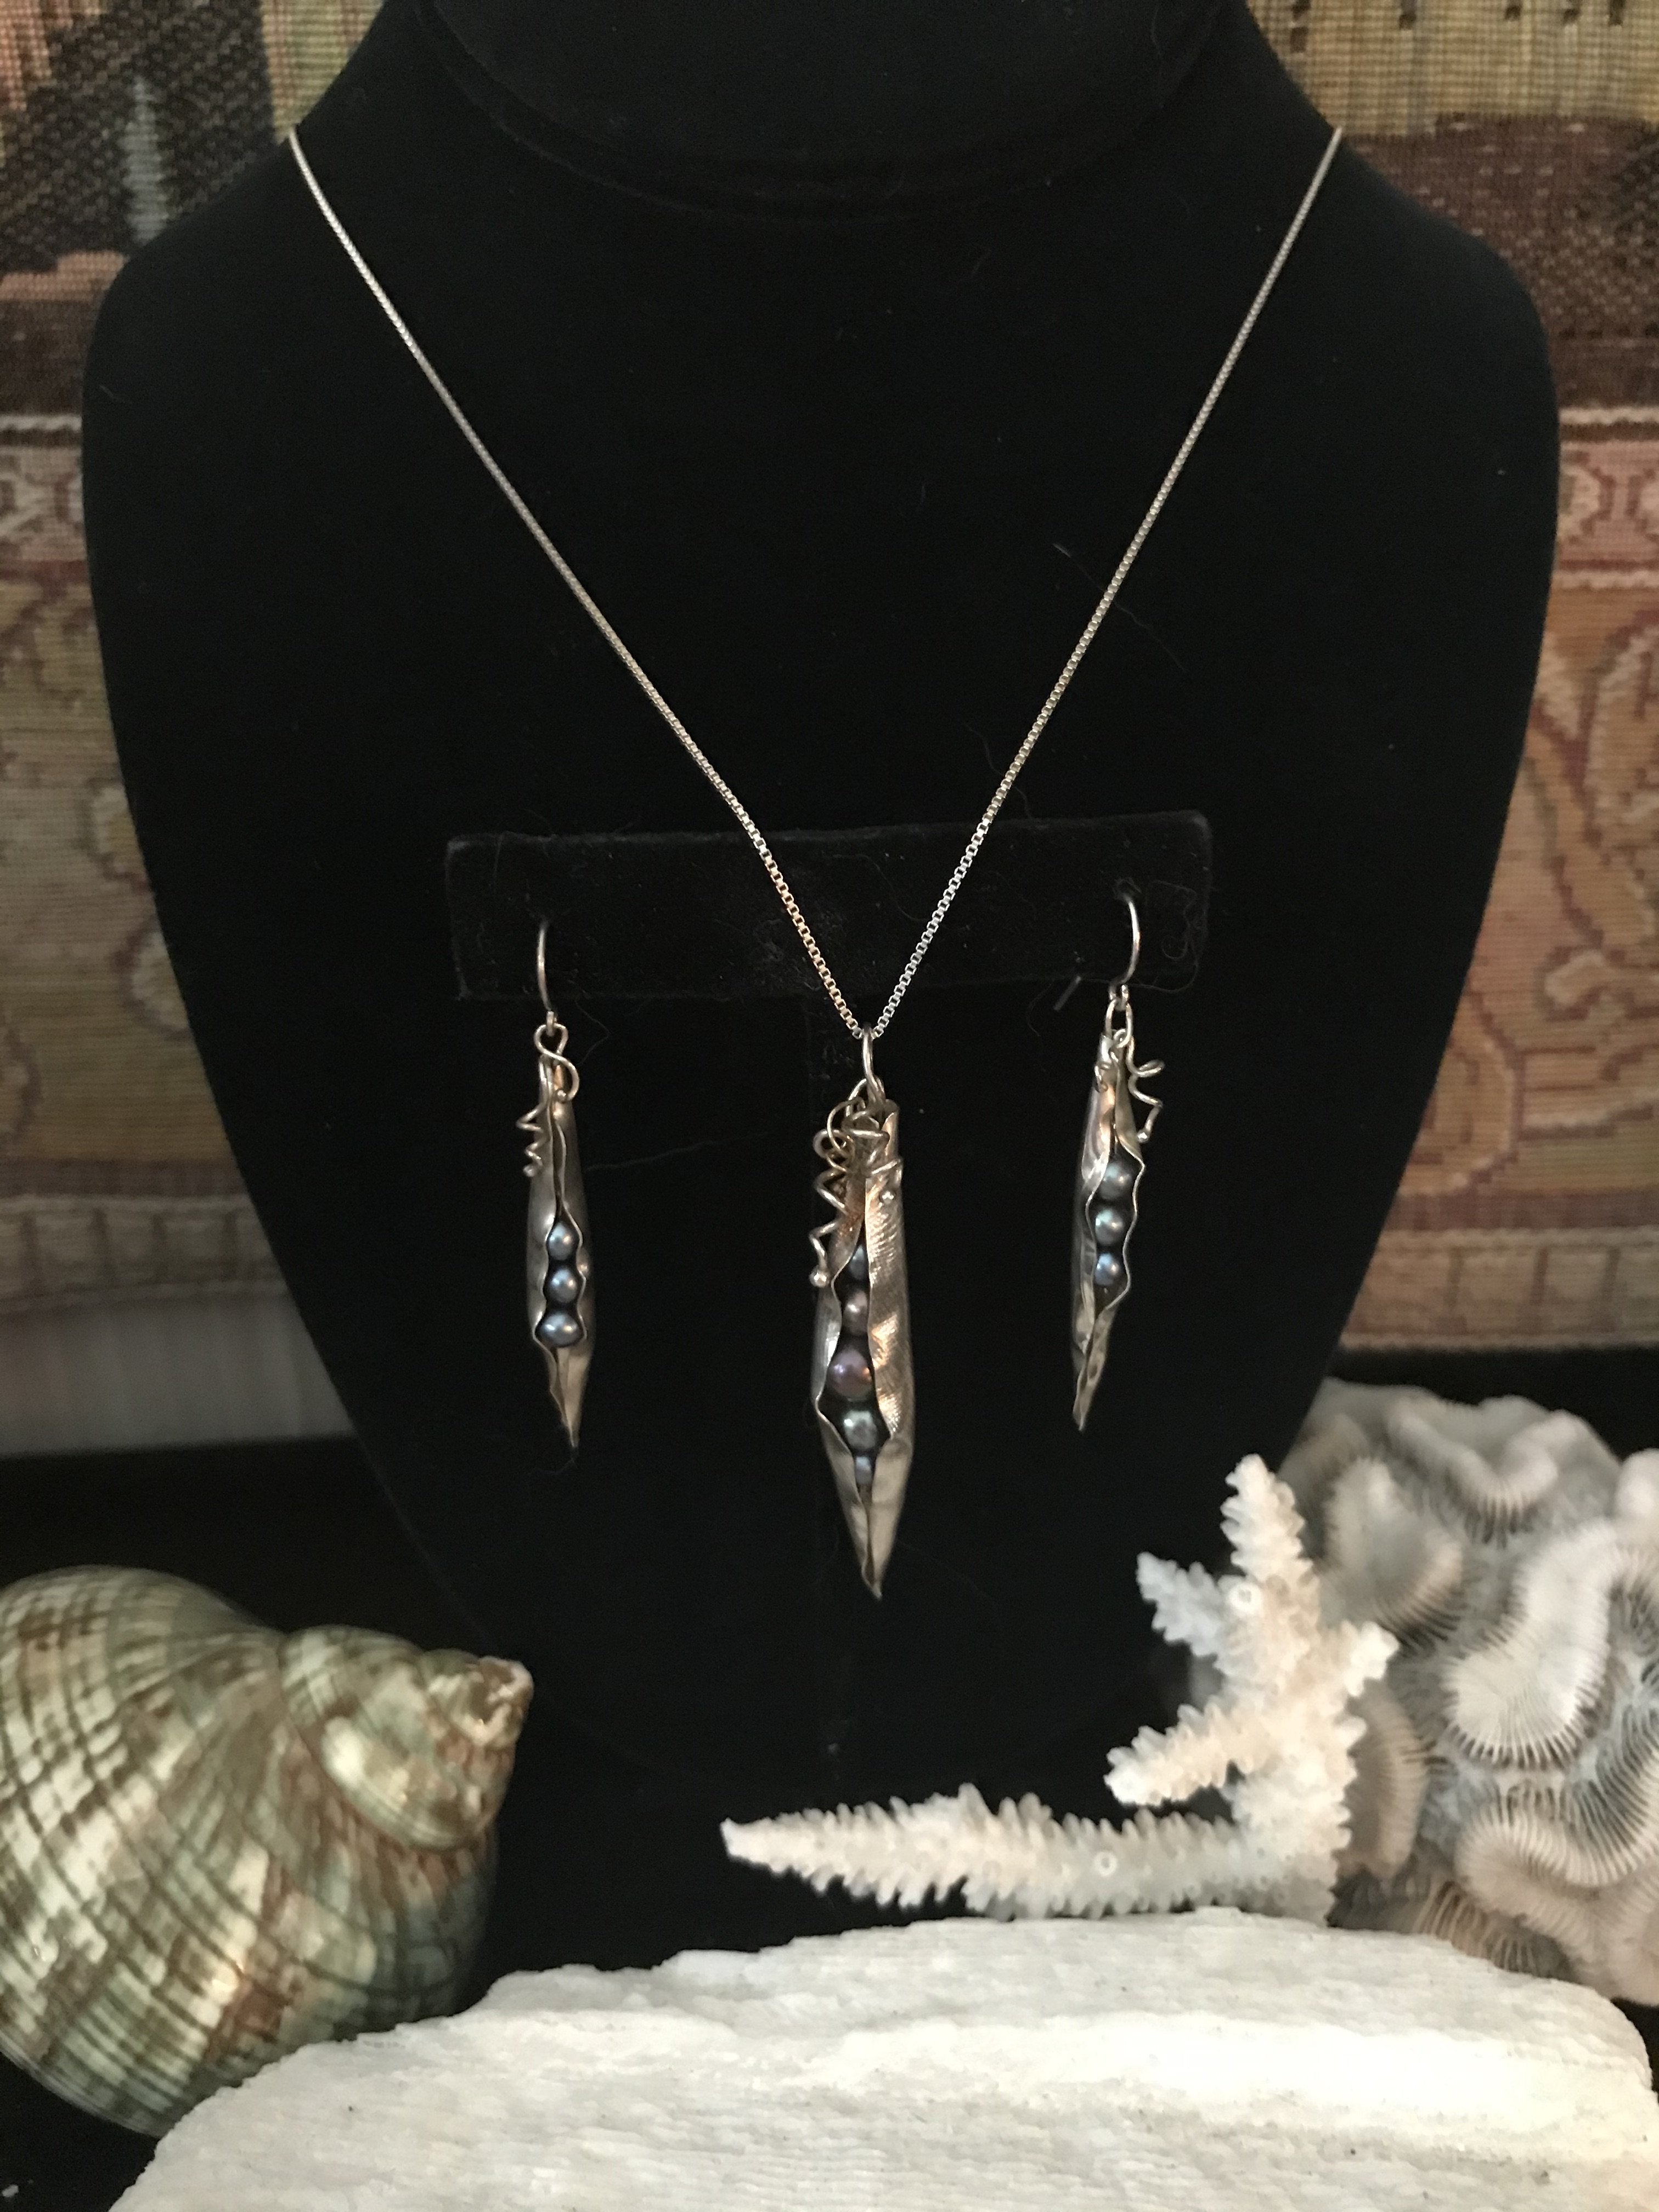 Handcrafted Artisan Pearls in a Pod Sterling Necklace and Earrings Set - Shop Thrifty Treasures